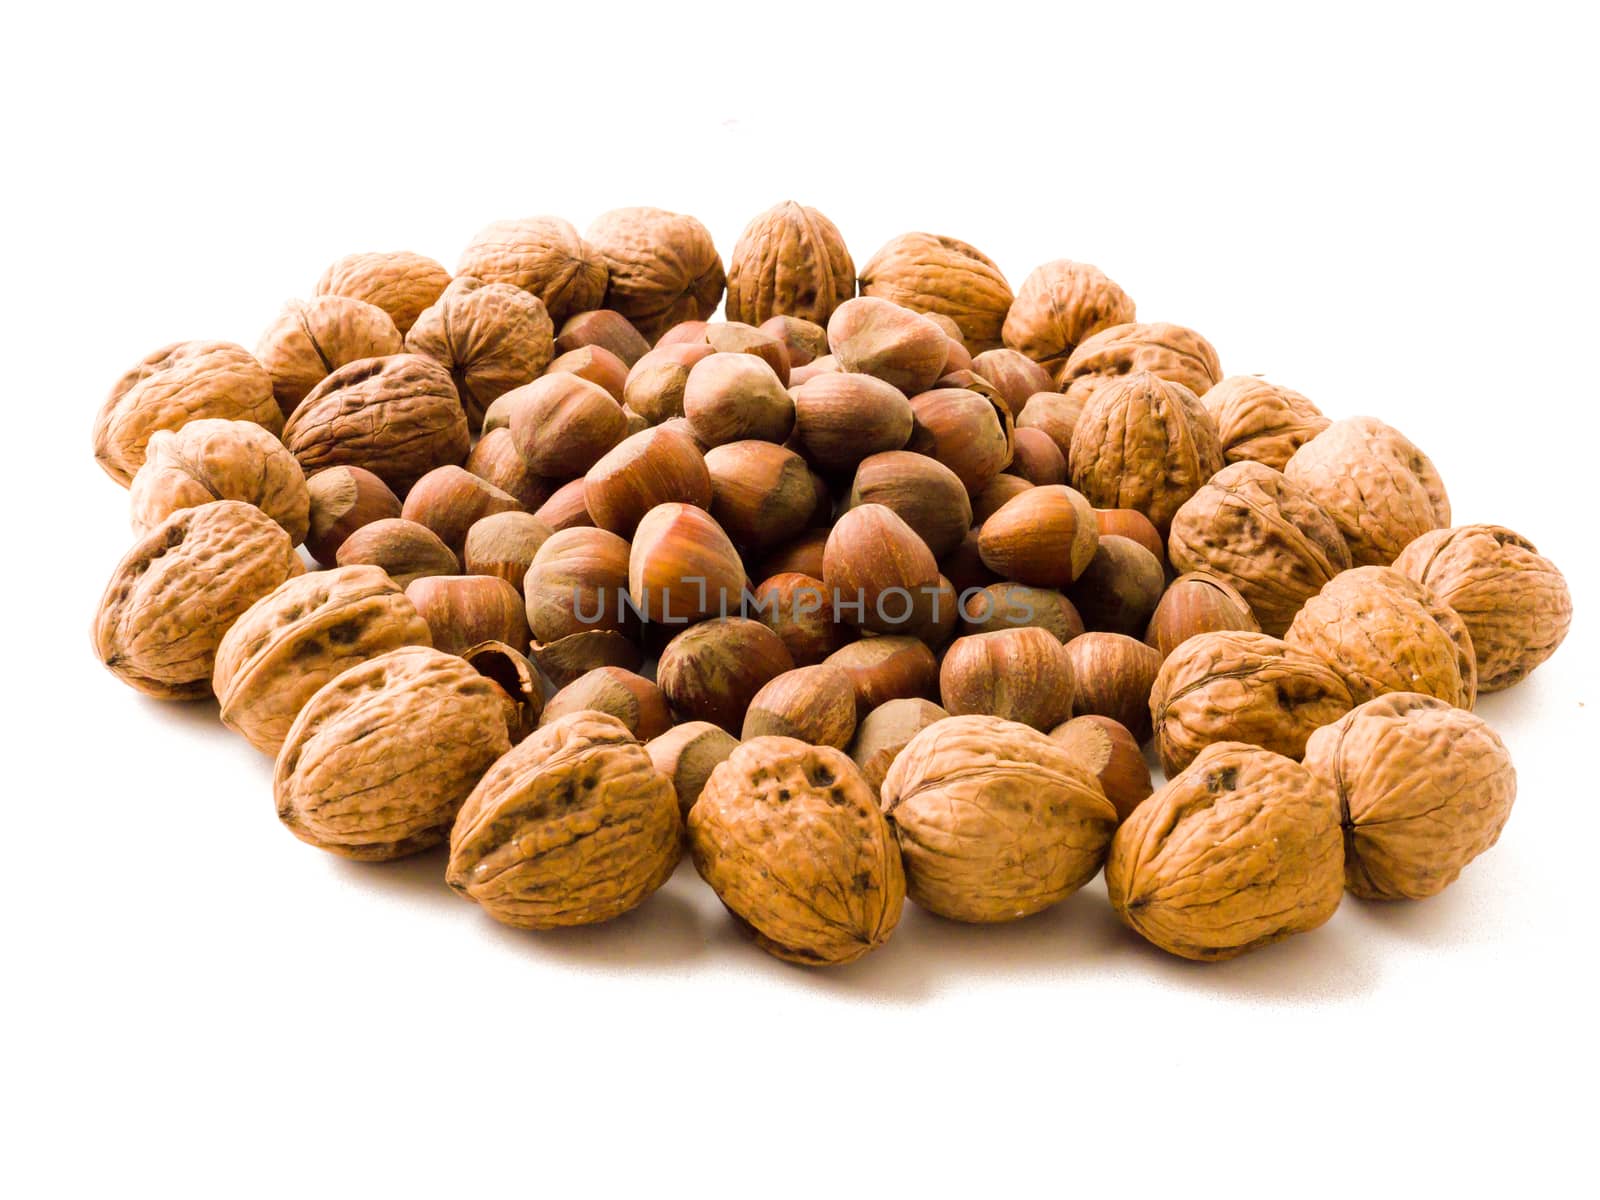 Mixed nuts - hazelnuts, walnuts isolated over white background.